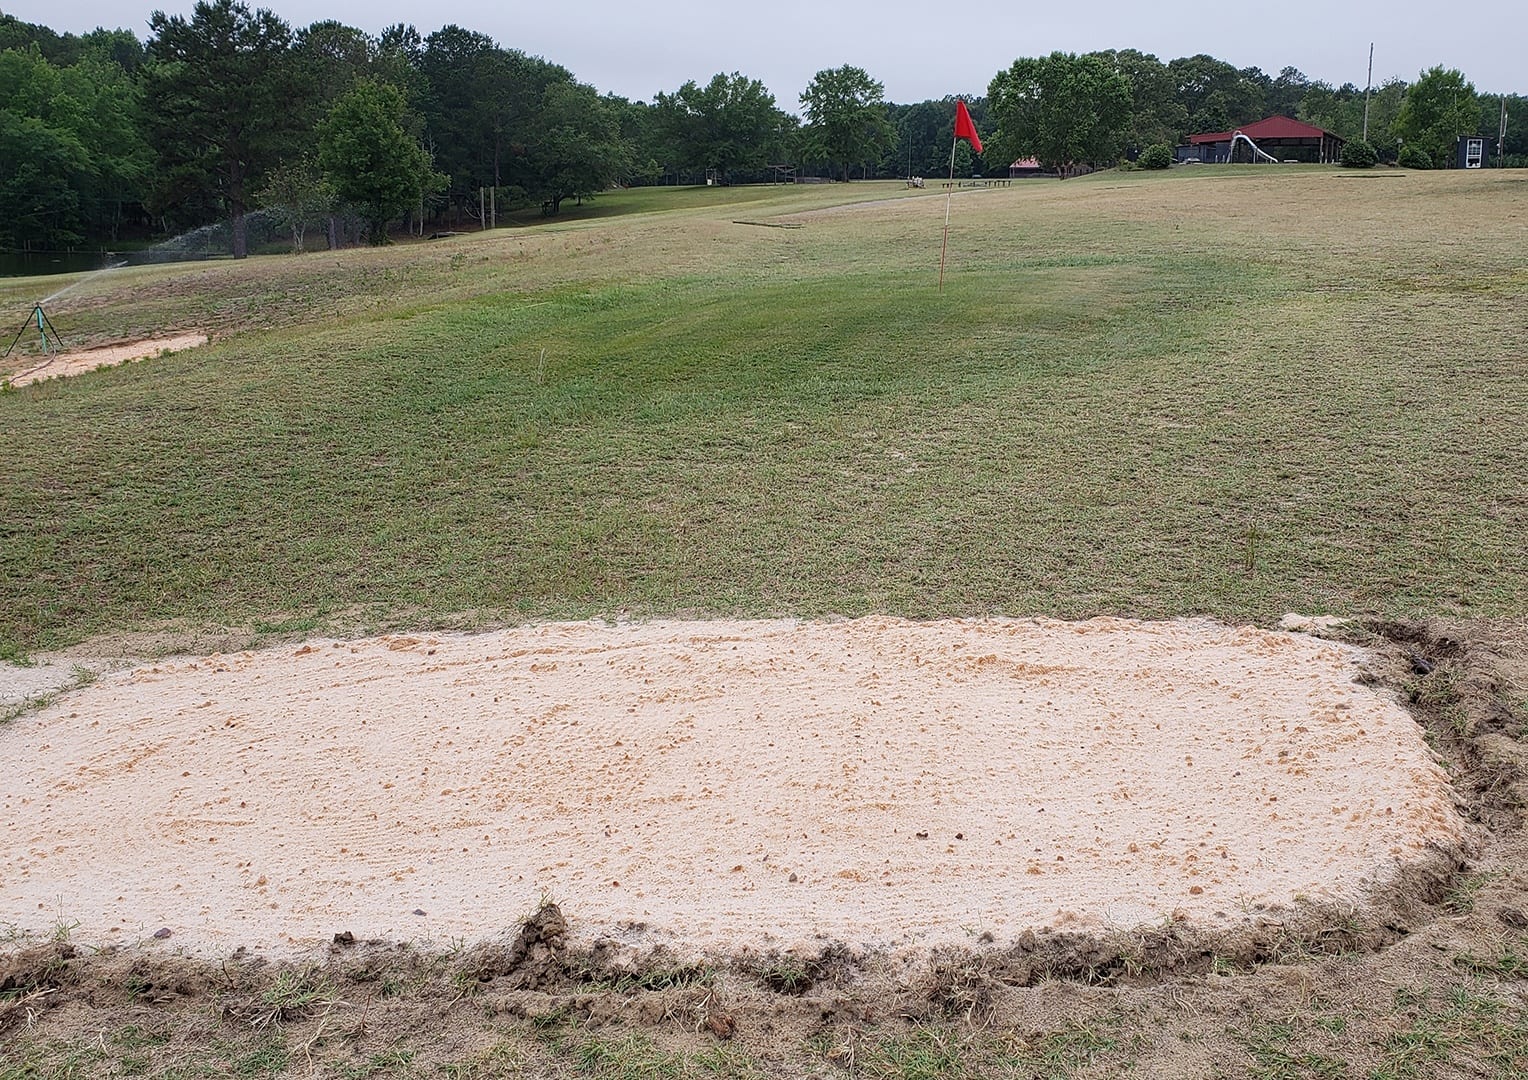 Bunker Practice Area at Butter and Egg Adventures